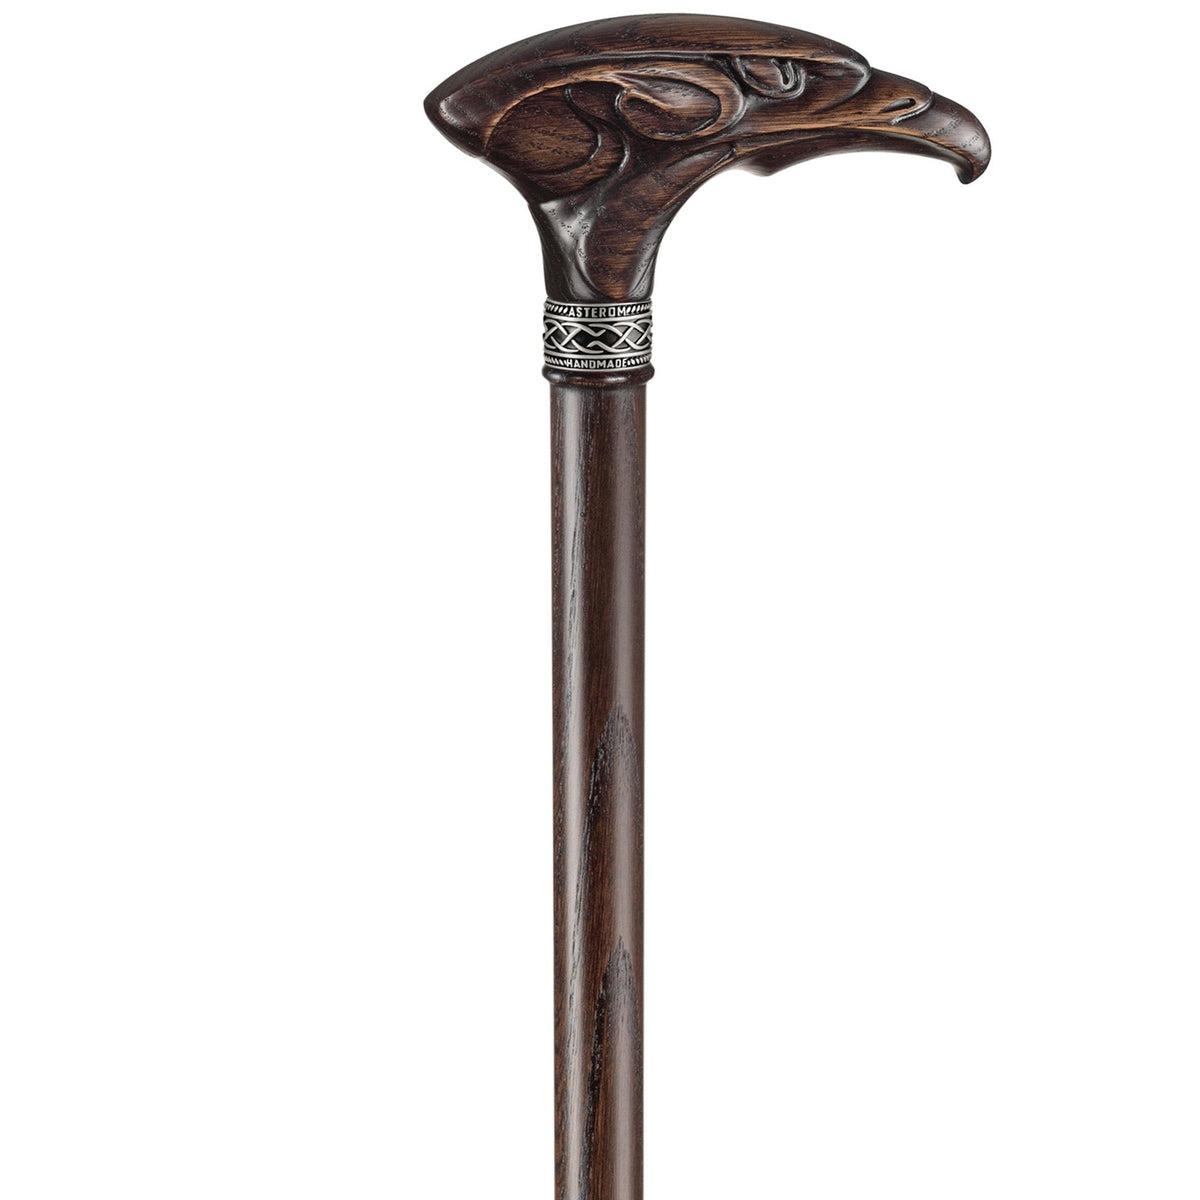 Wooden Eagle Head Cane Hand Carved Walking Stick